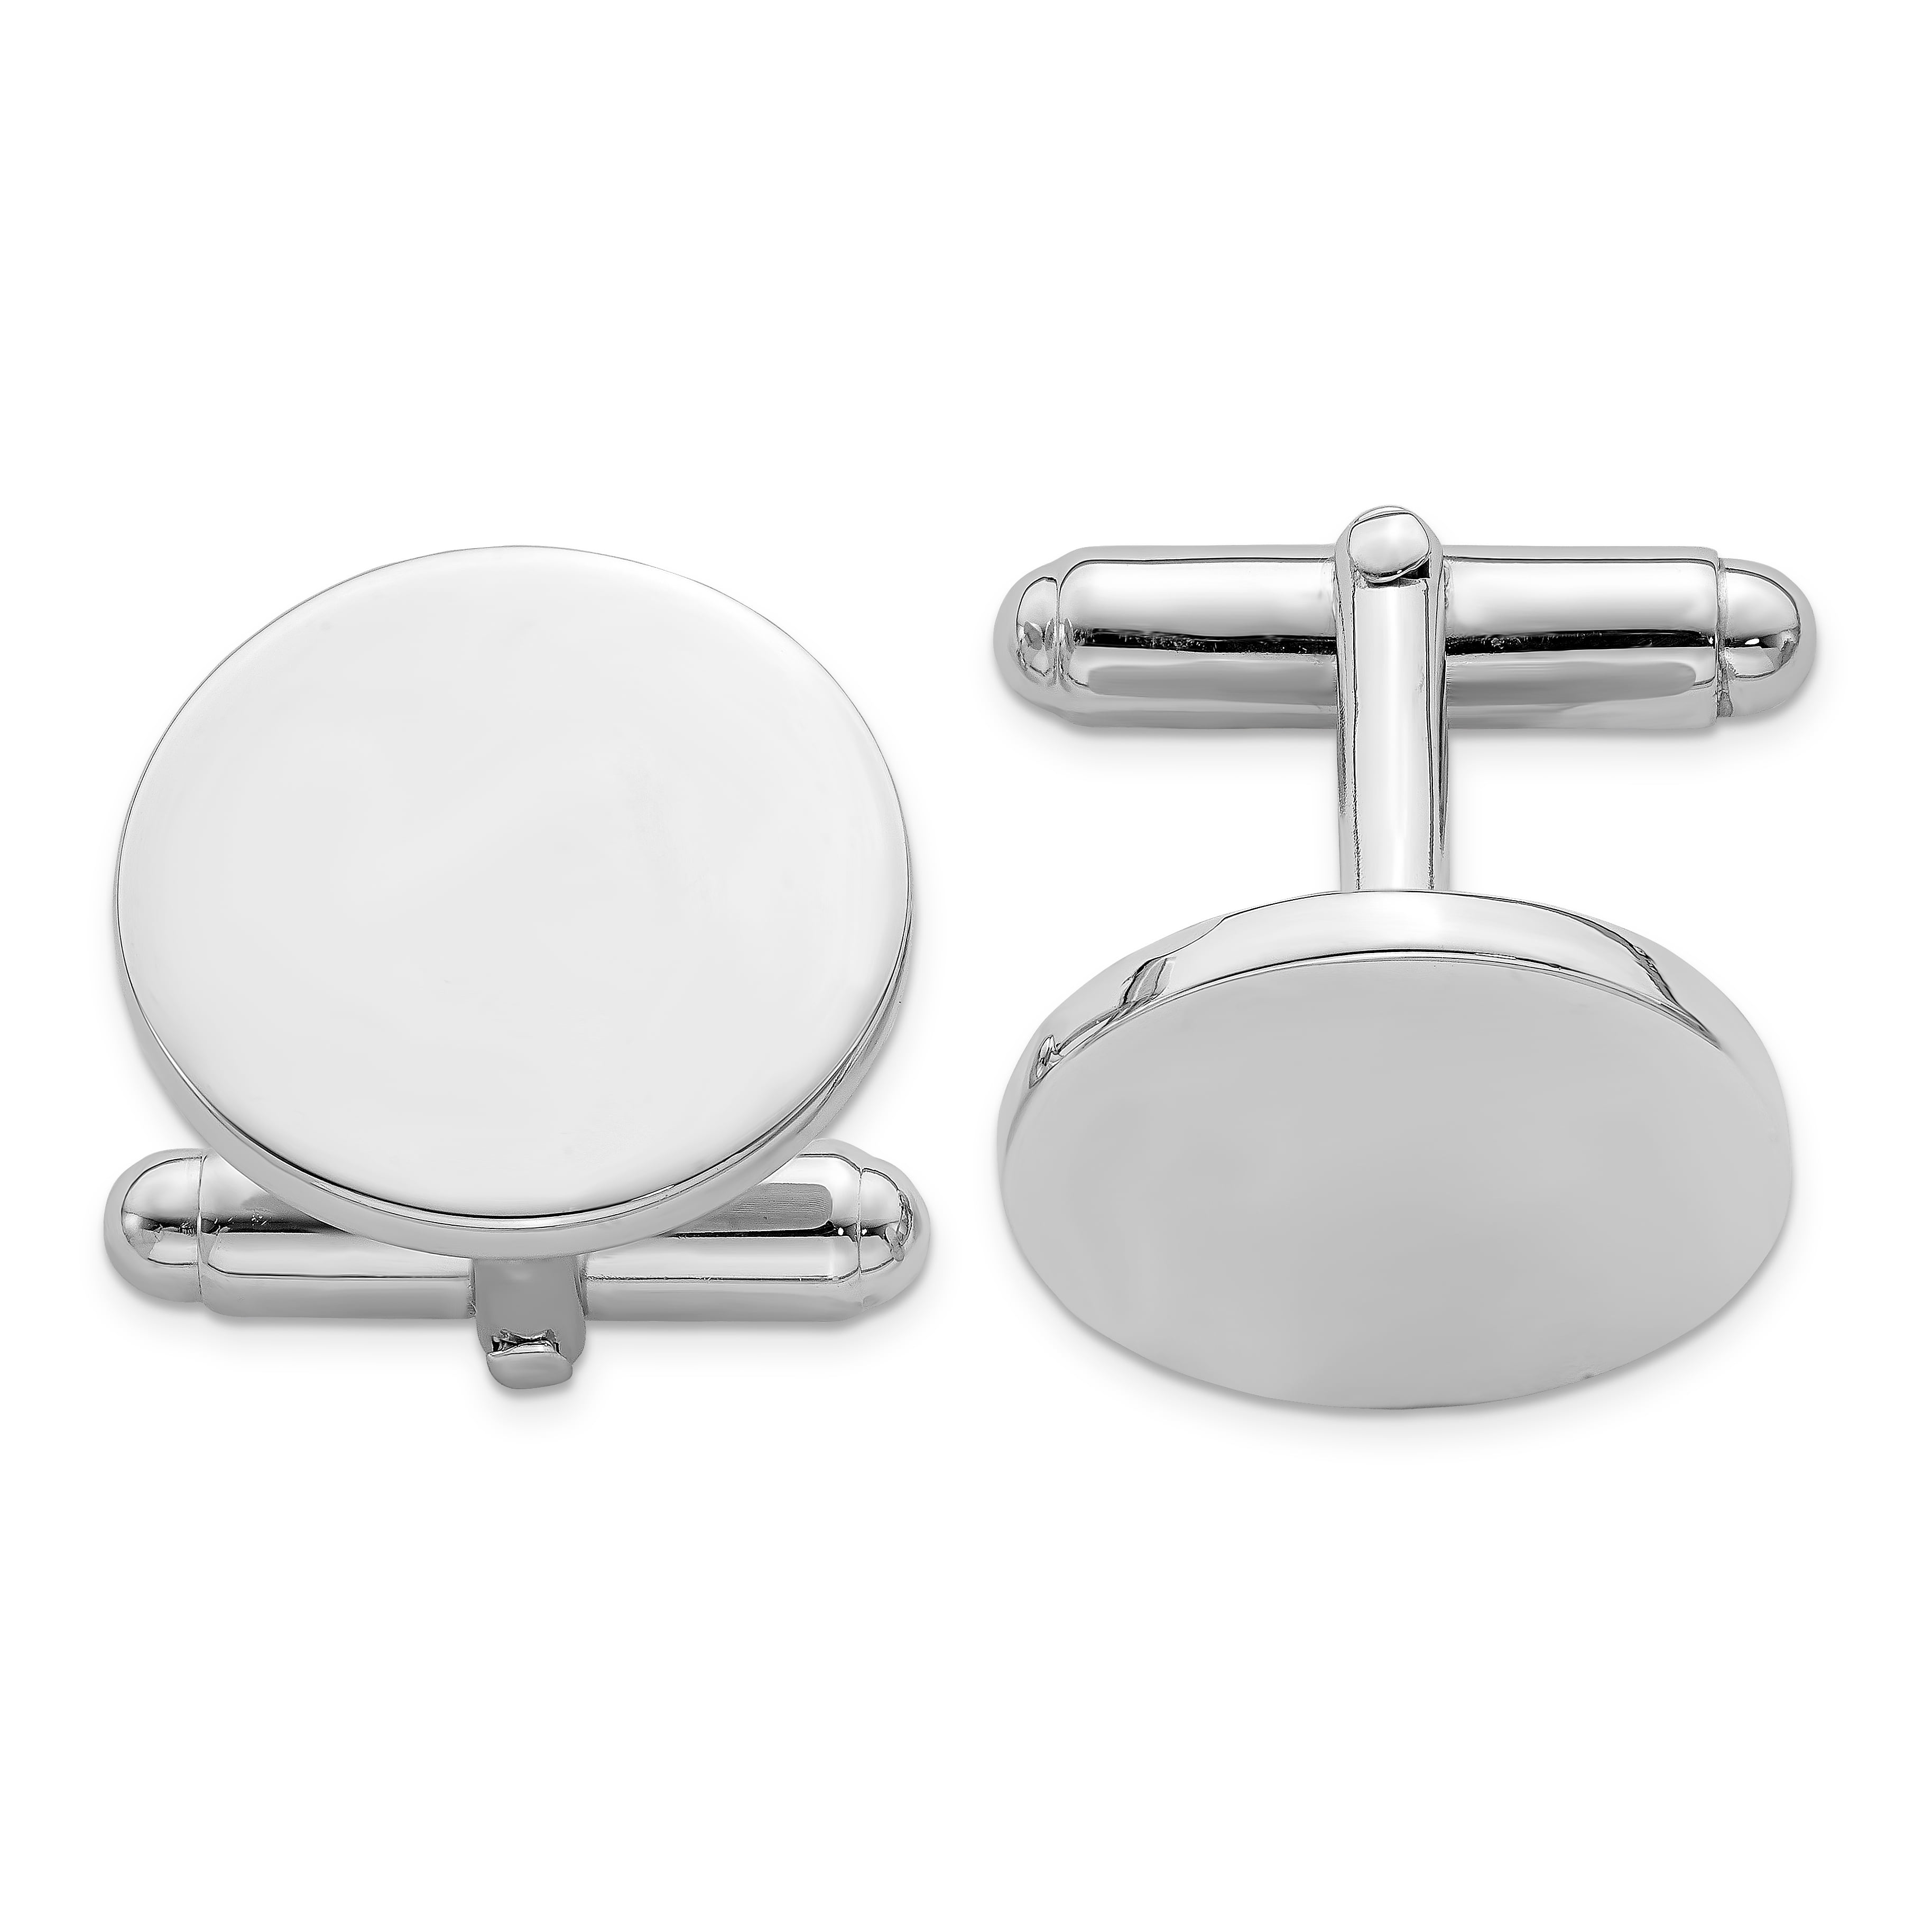 STERLING SILVER OVAL CUFFLINKS TOP QUALITY ENGLISH SILVER CUFFLINKS 2MM THICK 